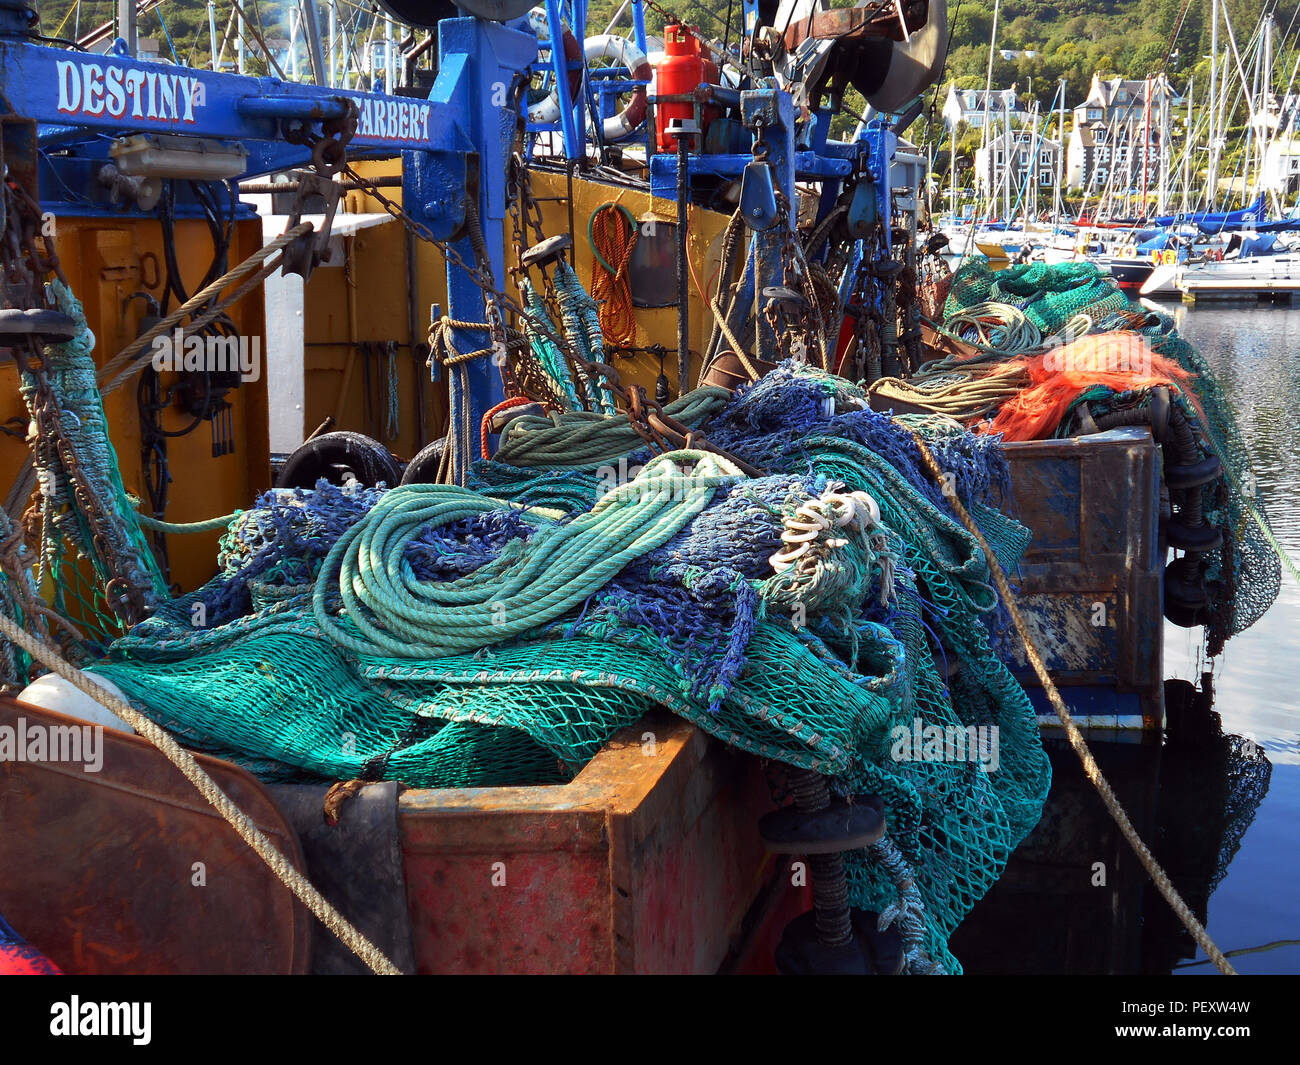 https://c8.alamy.com/comp/PEXW4W/the-huge-jumble-of-ropes-creels-and-nets-that-the-small-fishing-boats-of-tarbert-loch-fyne-need-these-days-to-secure-their-catch-of-fish!-i-wouldnt-like-to-sort-that-lot-out!-PEXW4W.jpg